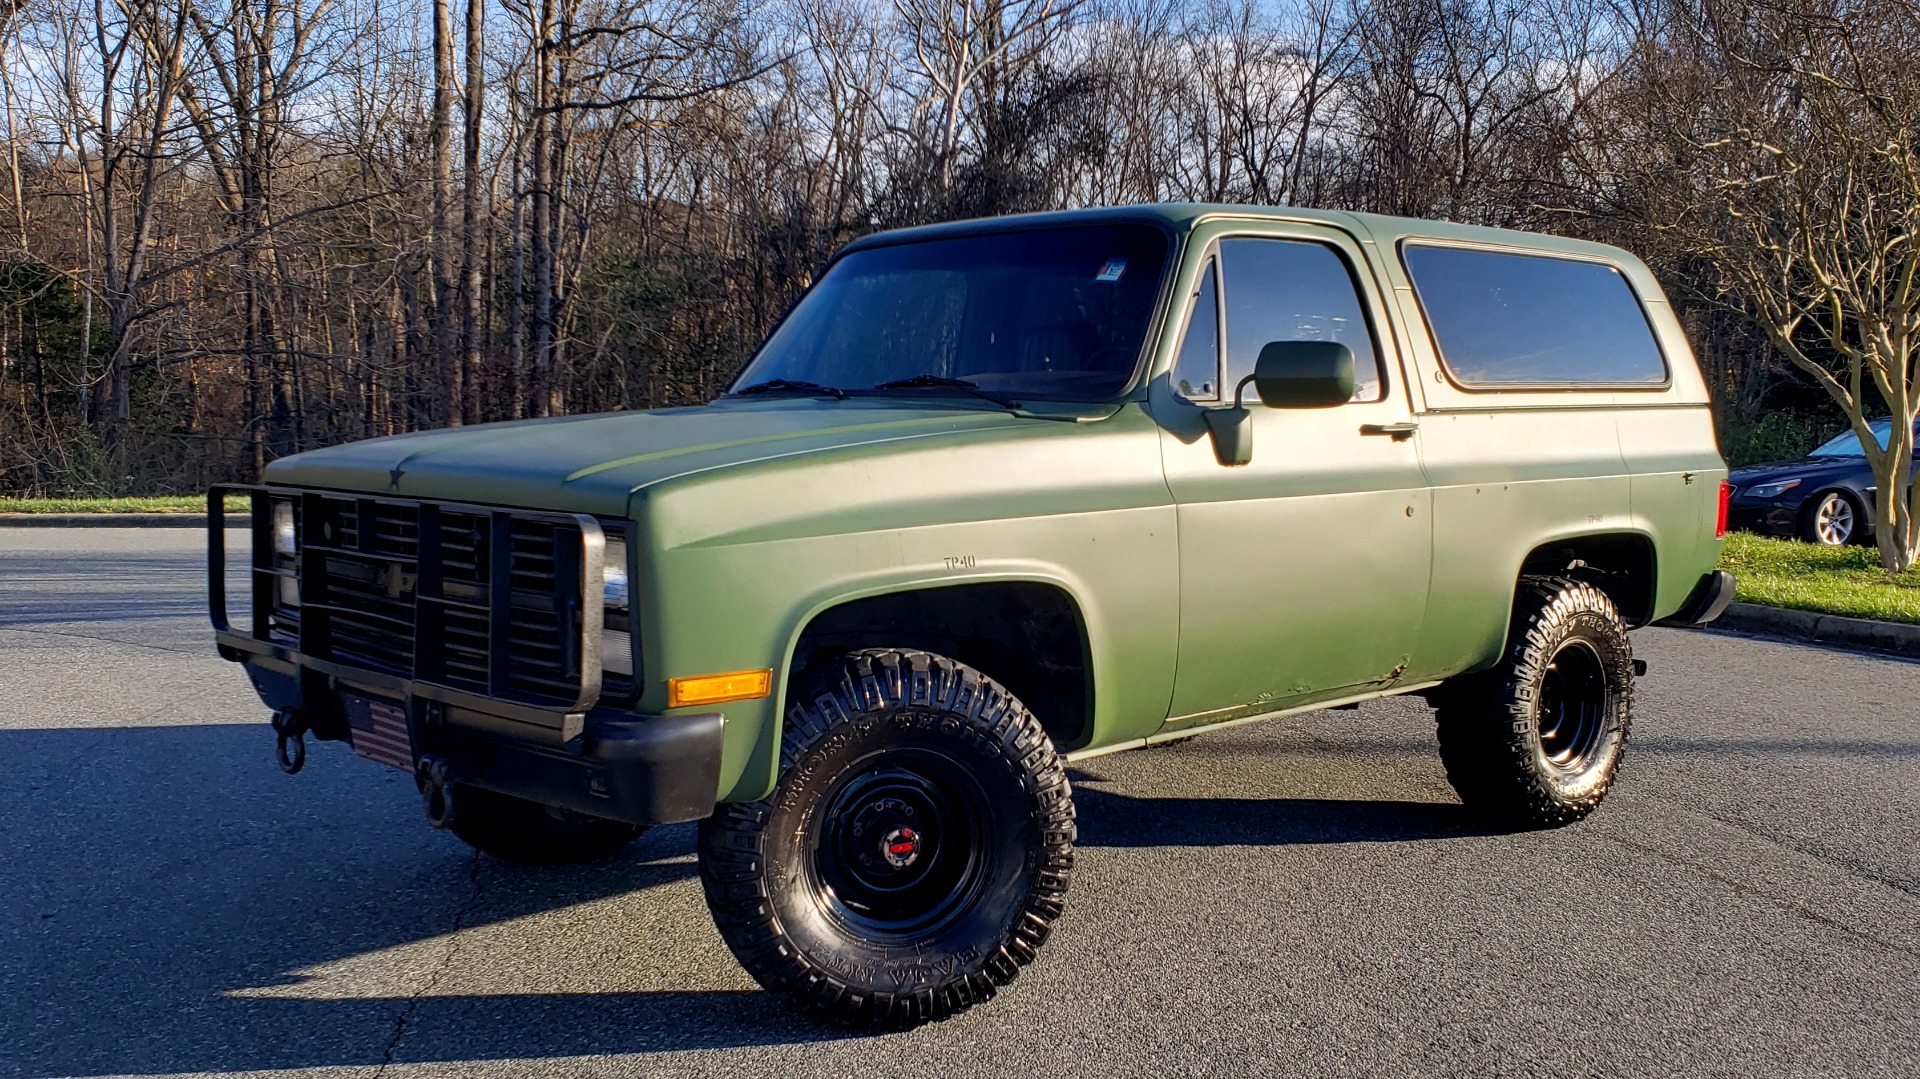 Used 1985 Chevrolet BLAZER D10 MILITARY SUV / 4X4 / 6.2L DIESEL V8 / VINTAGE AIR for sale Sold at Formula Imports in Charlotte NC 28227 1